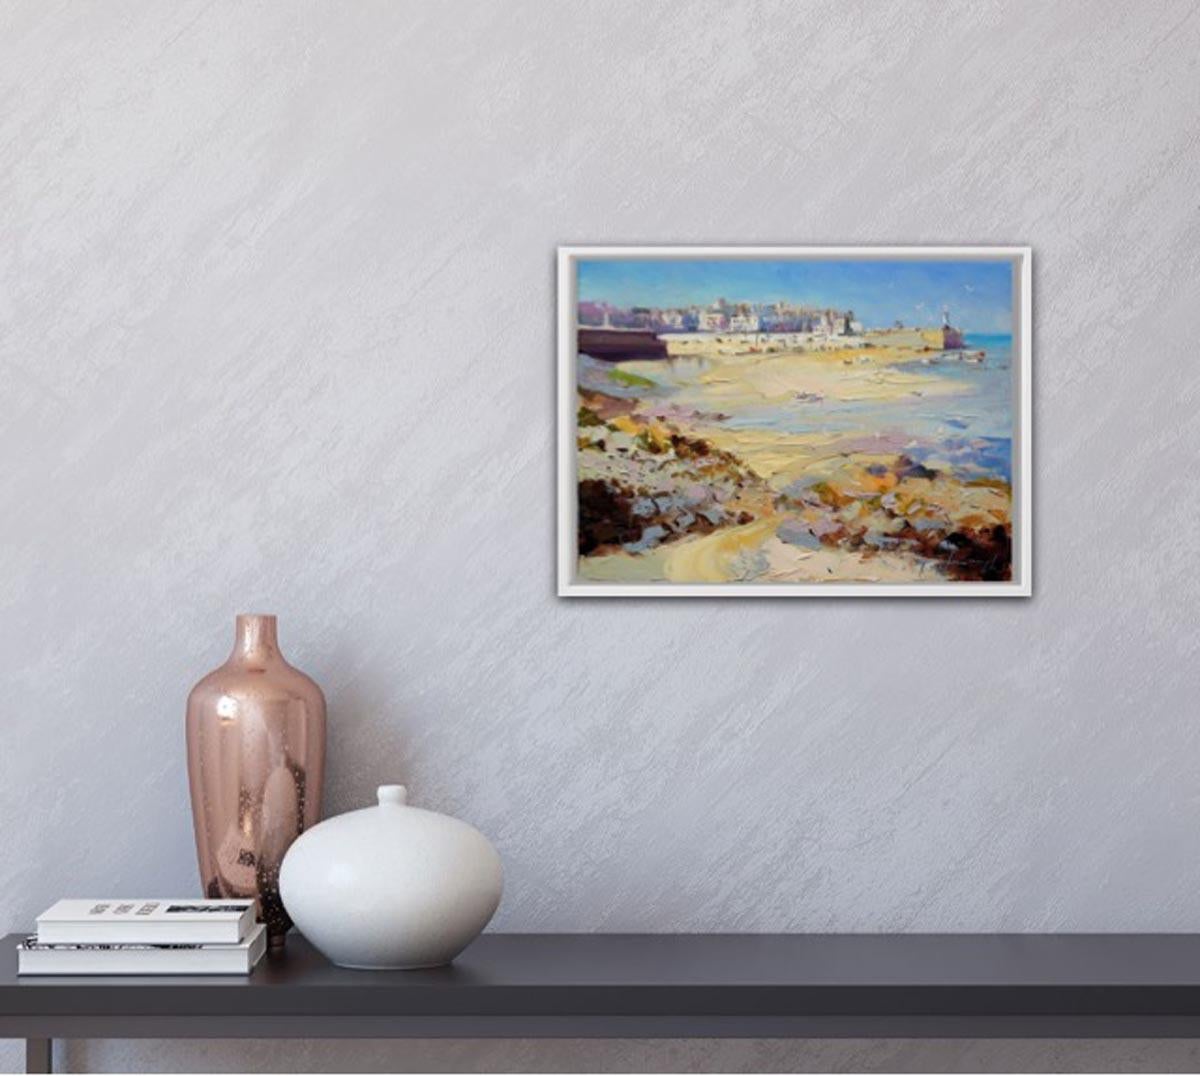 Trevor Waugh
St Ives, Cornwall
Original Seaside Painting
Oil Paint on Canvas
Framed Size: H 30.5cm x W 40.5cm
Sold Framed
Please note that in situ images are purely an indication of how a piece may look.

St Ives, Cornwall is an original landscape